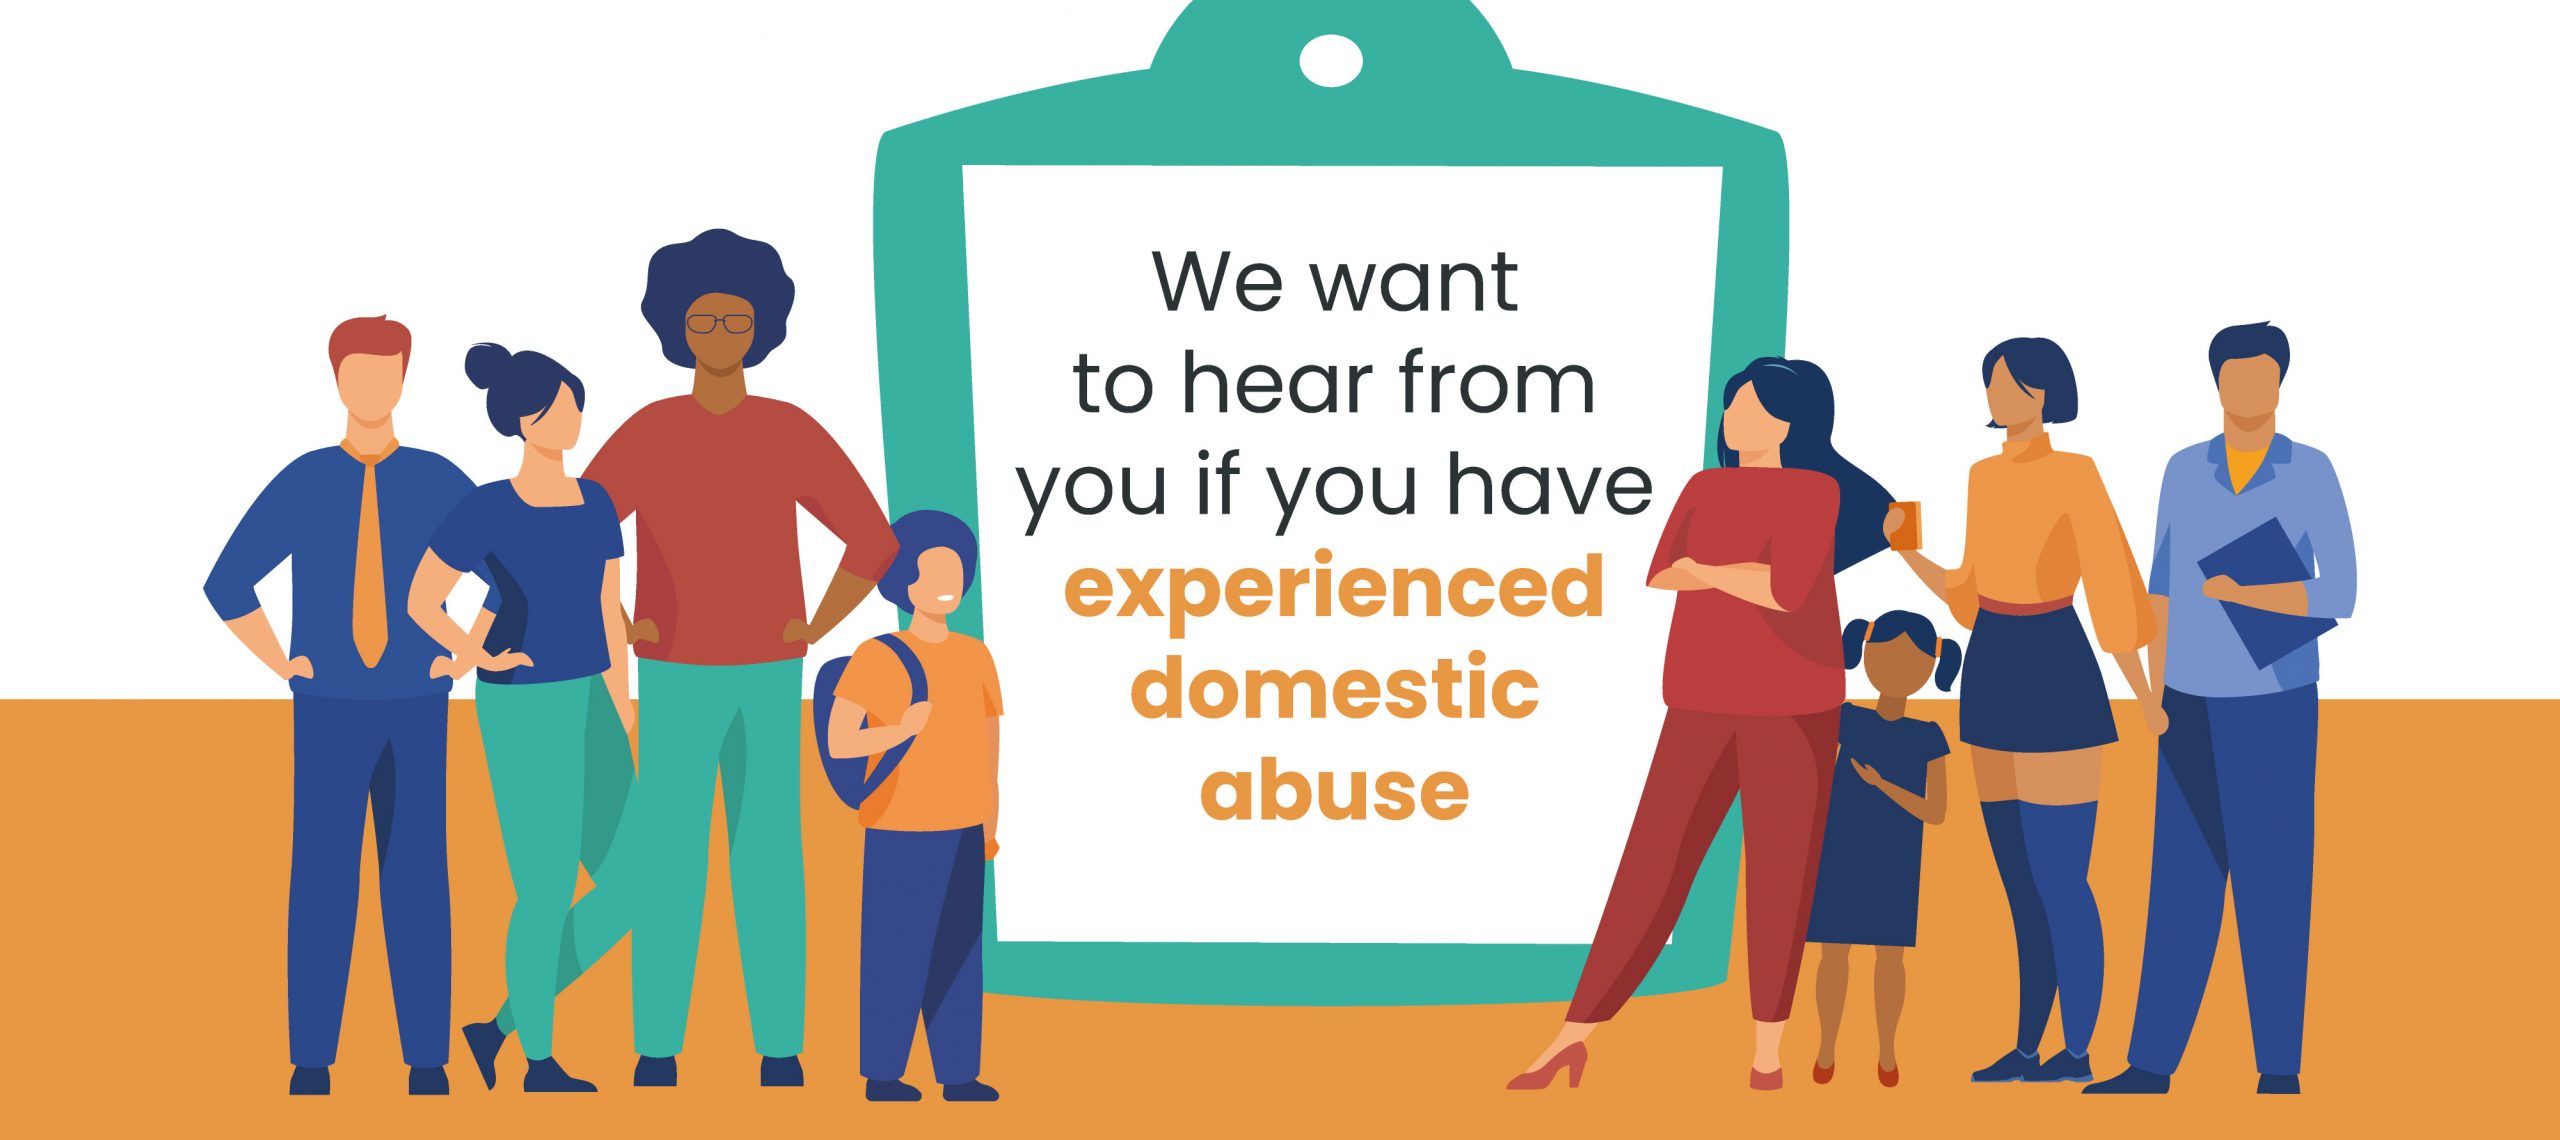 We are launching a survey for anyone who has experienced domestic abuse in England and Wales